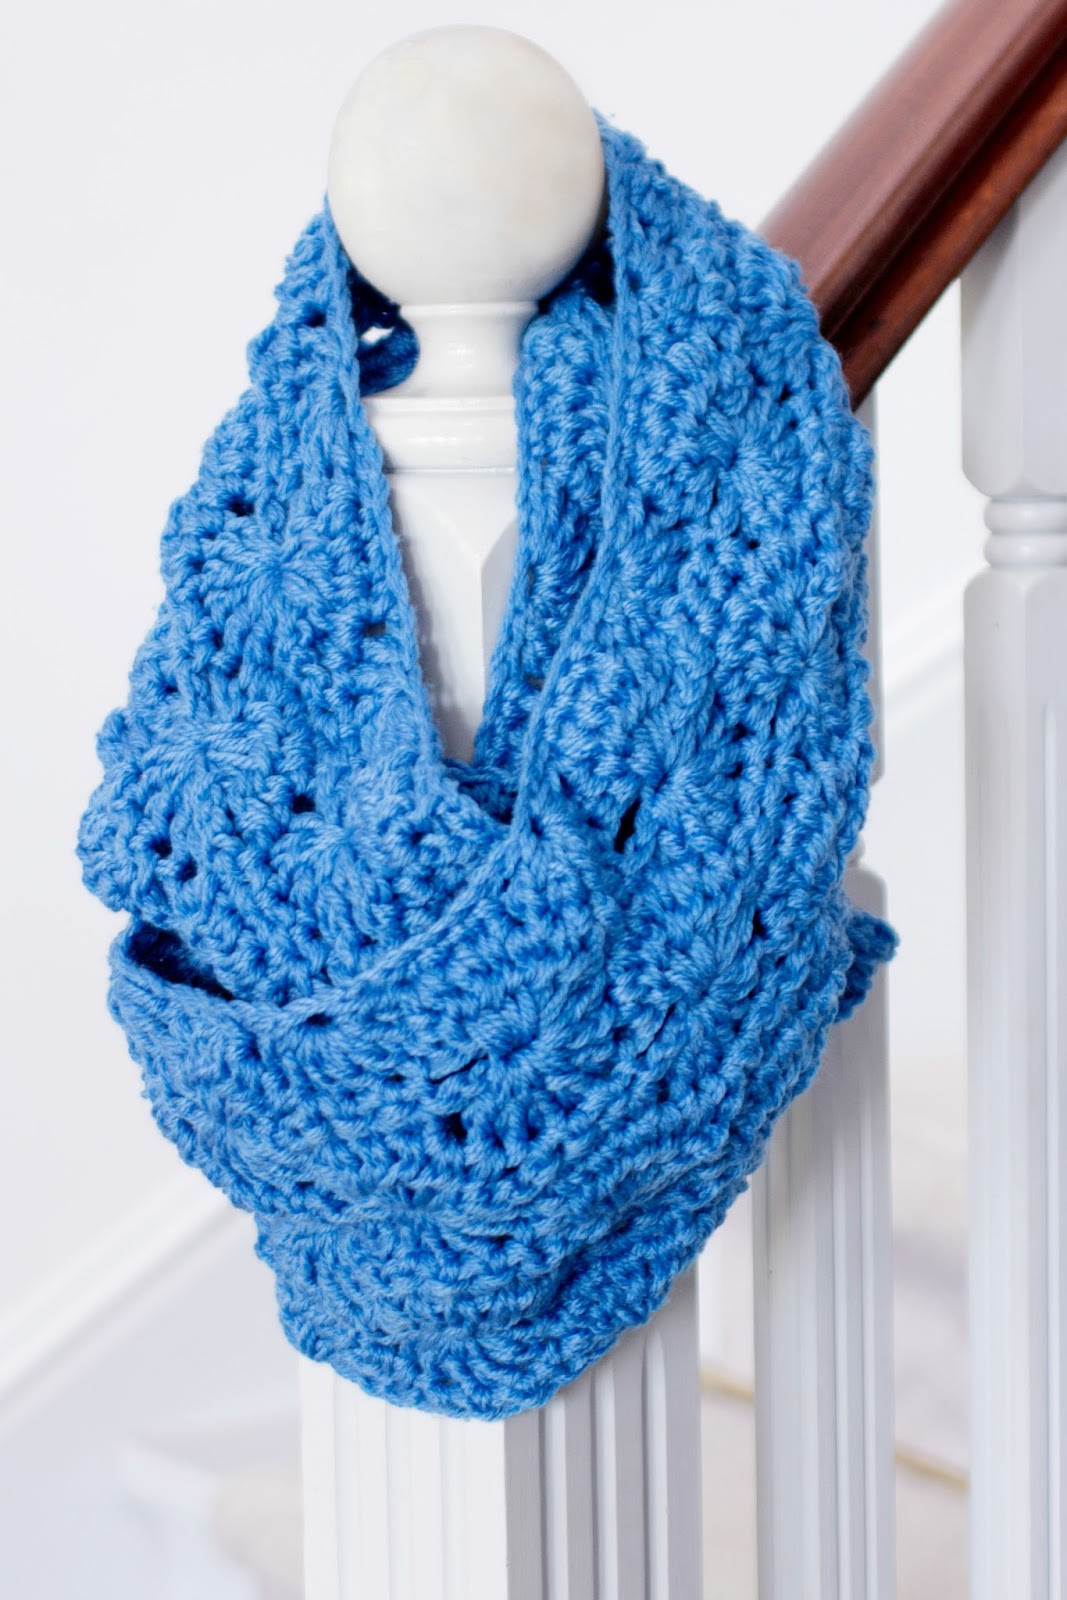 These free crochet scarf patterns can be all the motivation that you need